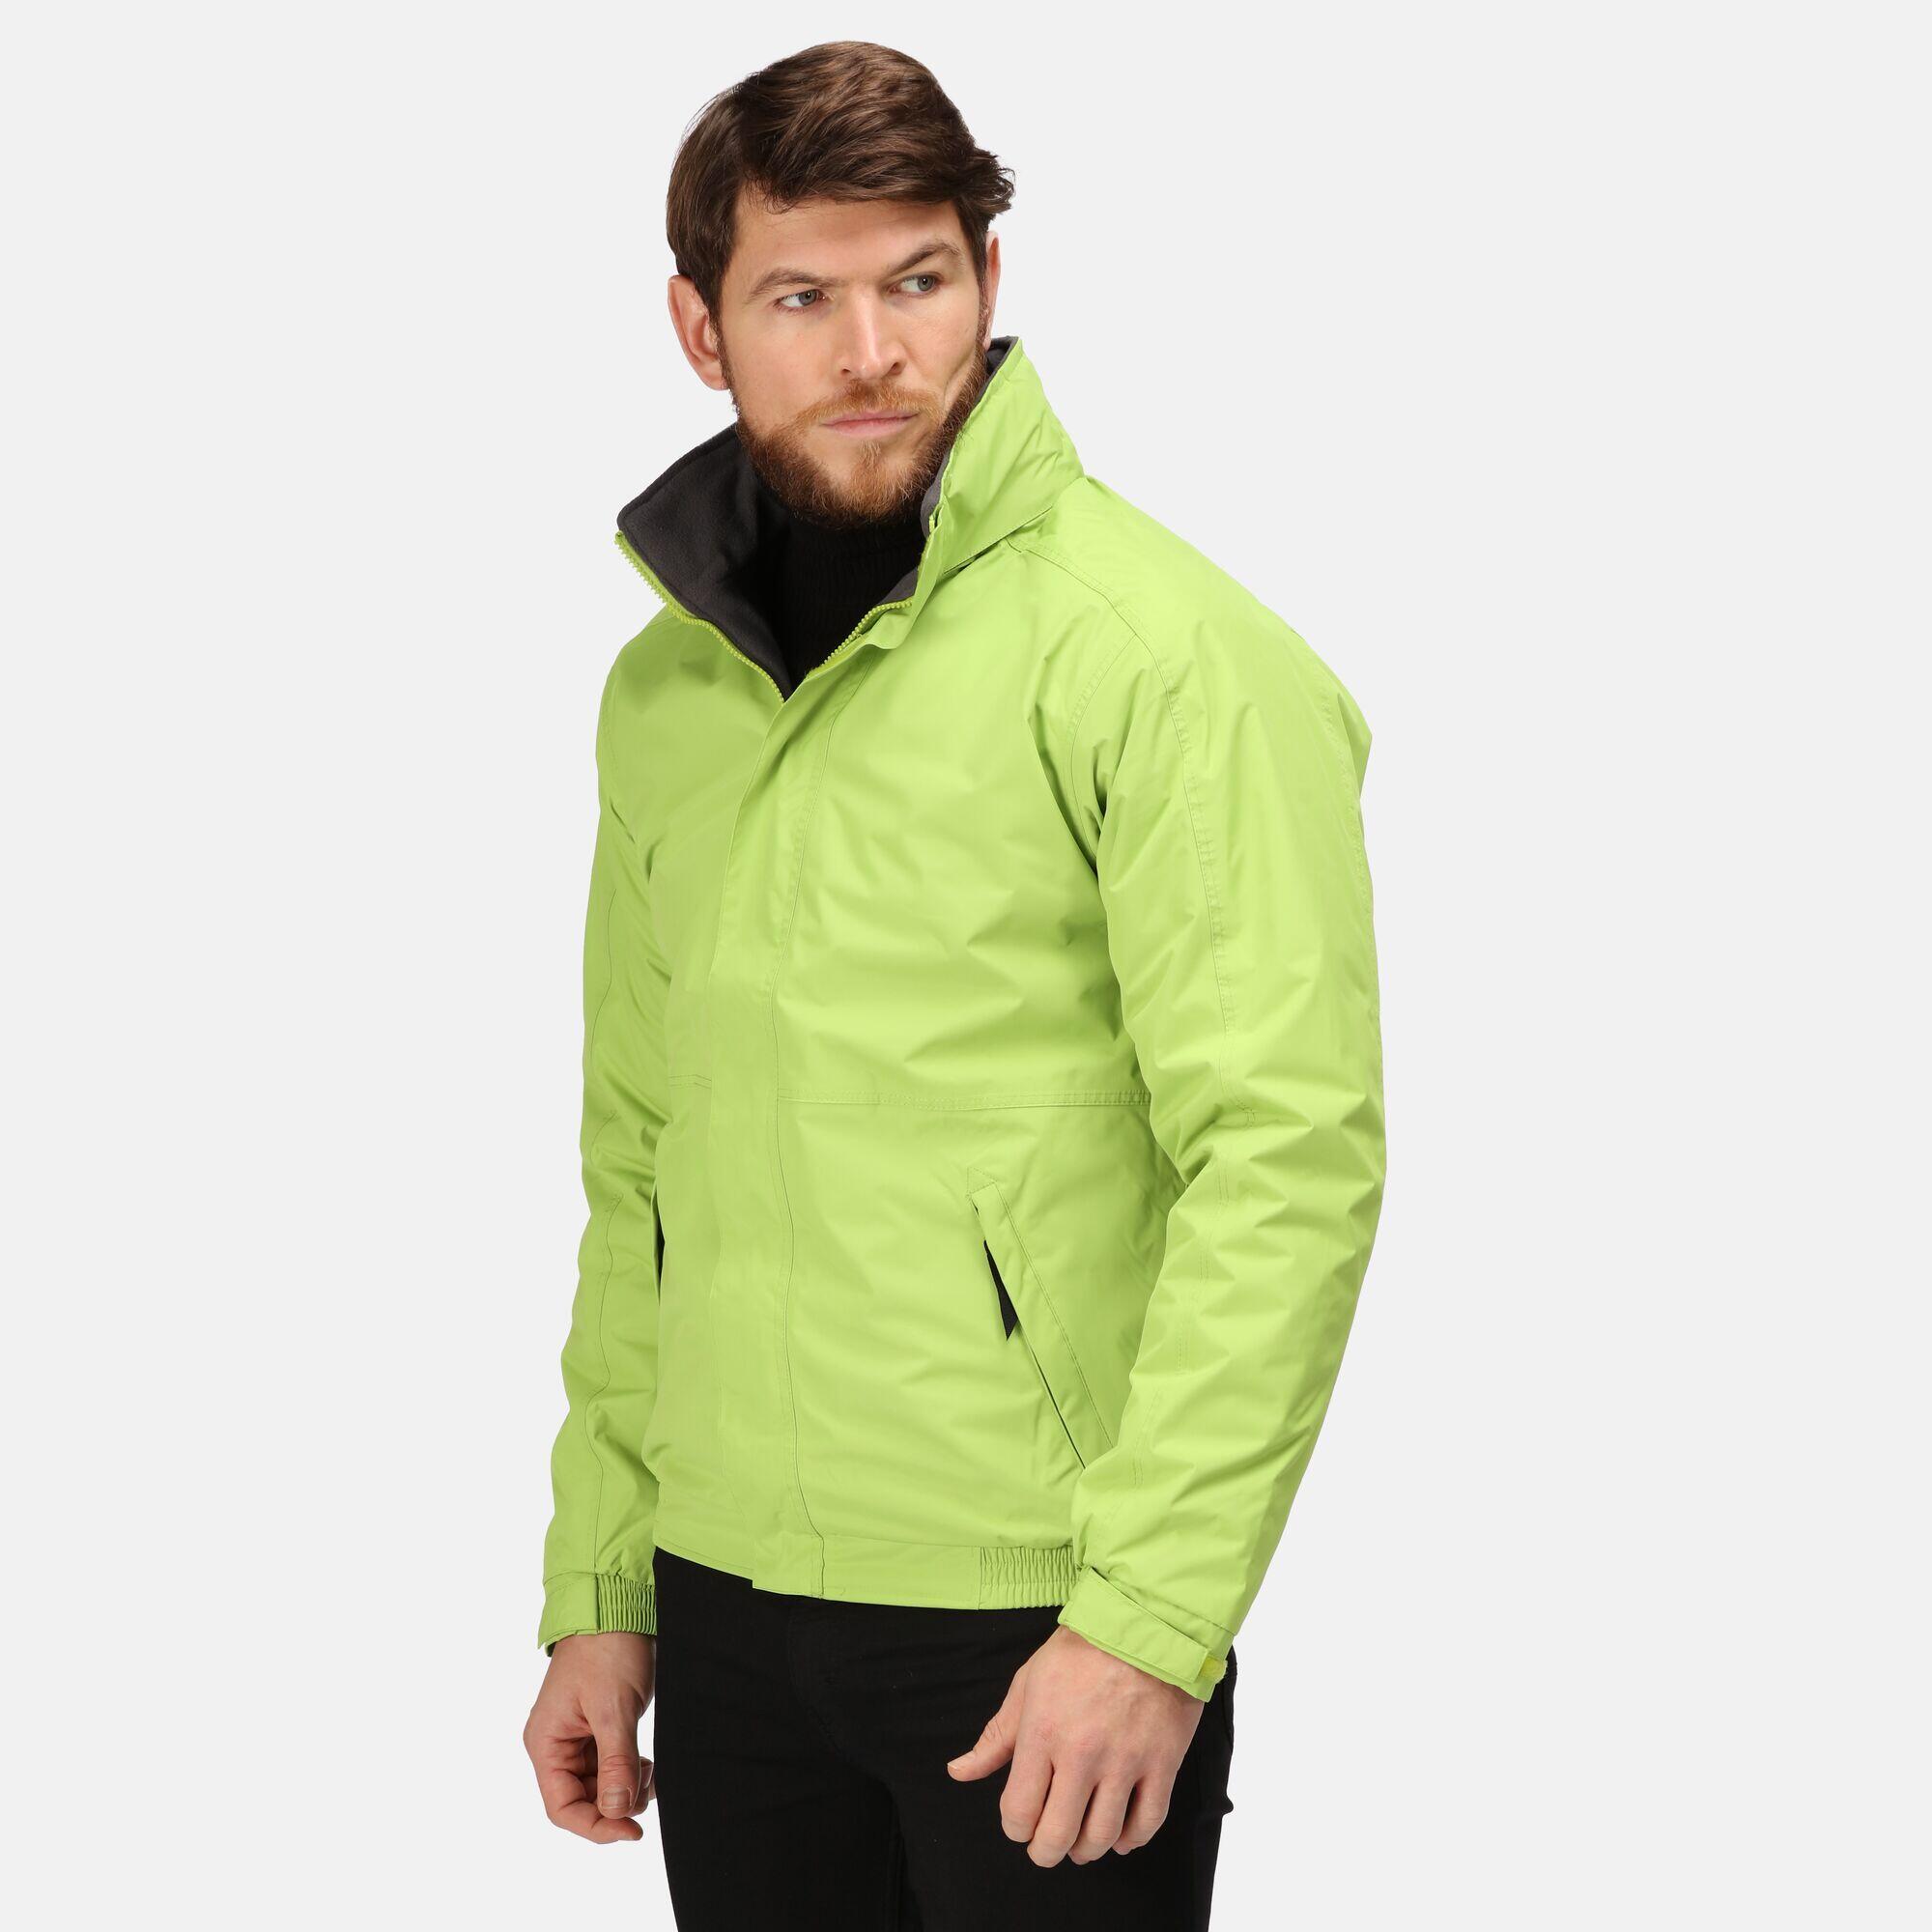 Dover Waterproof Windproof Jacket (ThermoGuard Insulation) (Key Lime/Seal Grey) 4/5